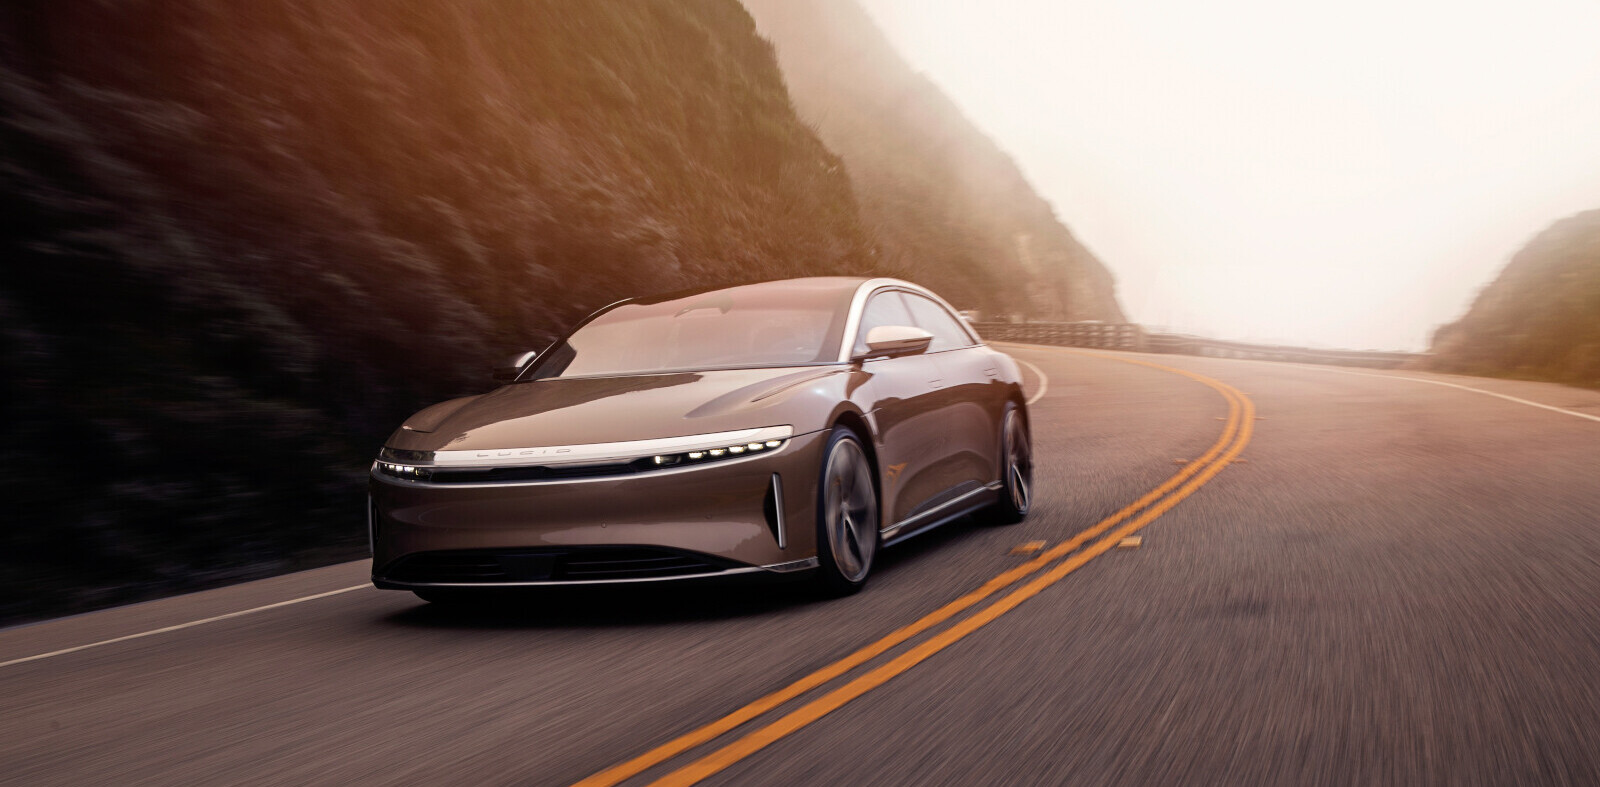 Lucid unveils the Air, its luxury EV with up to 517-miles of range costing as much as $169K